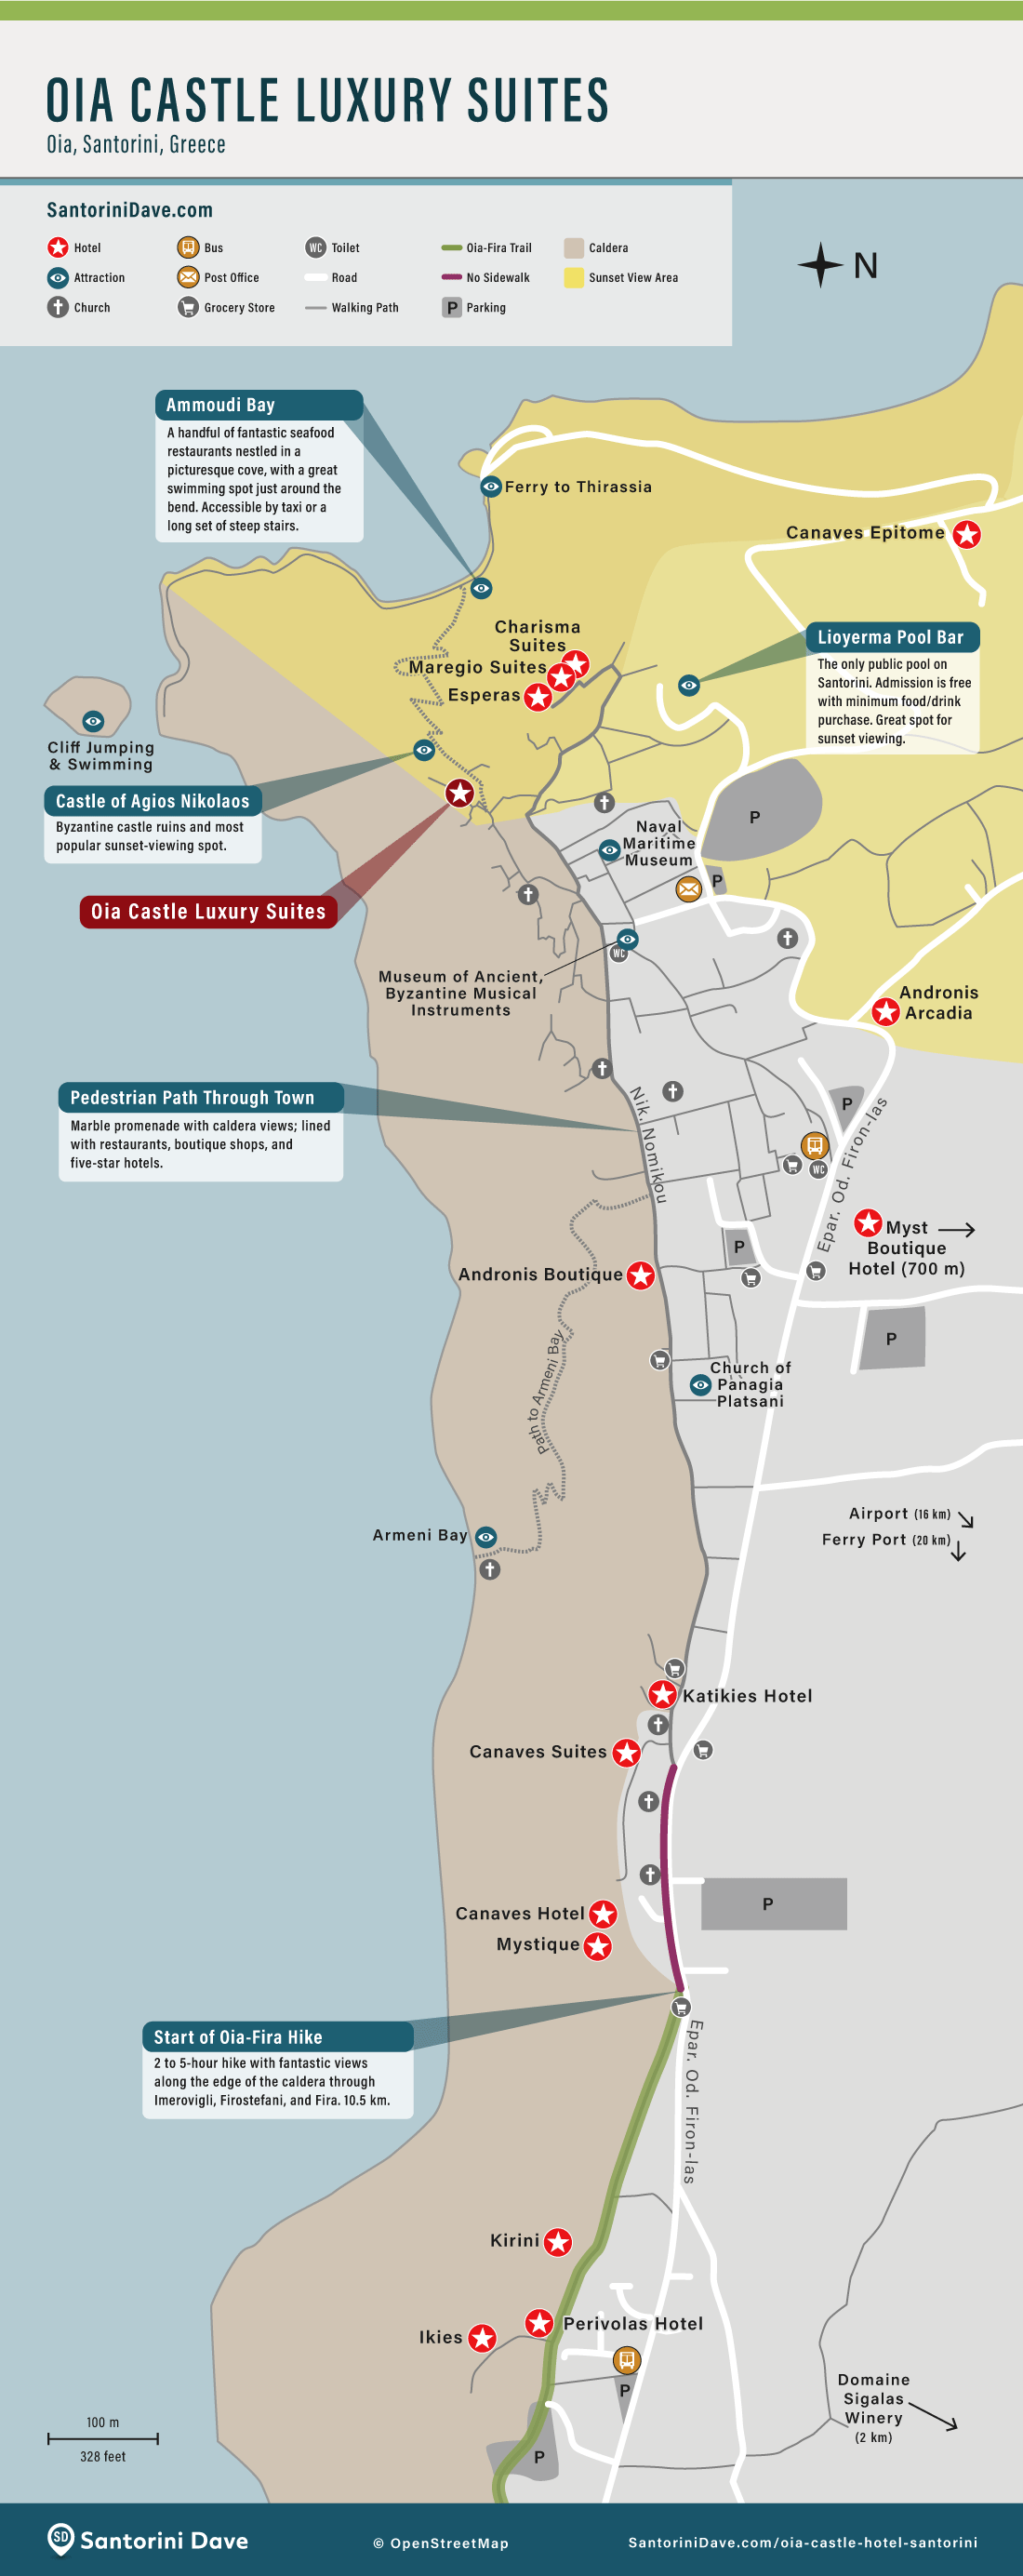 Map showing the location of Oia Castle Luxury Suites hotel in relation to the top things to do in Oia, Santorini, Greece.